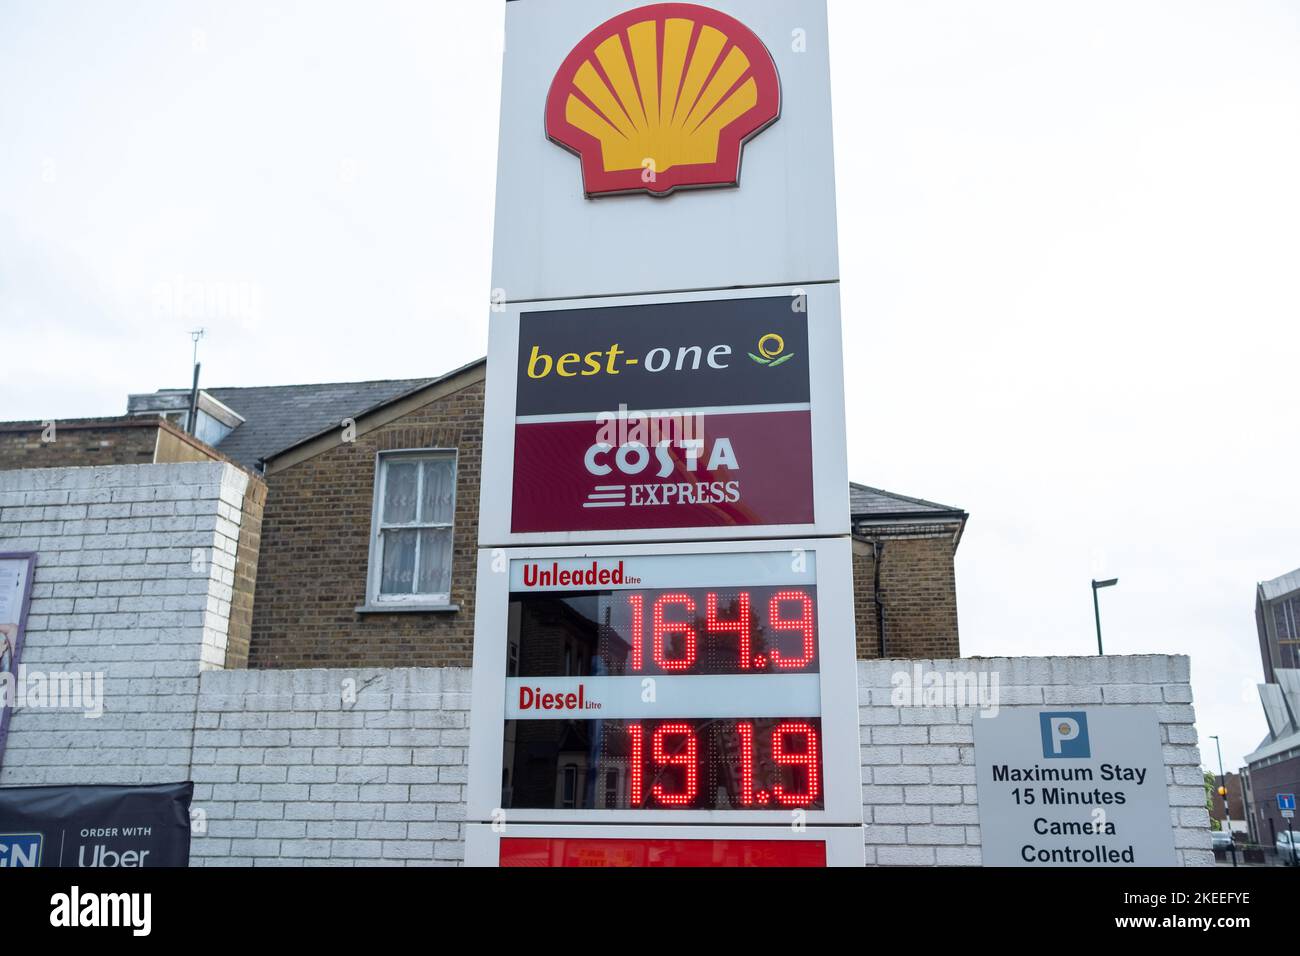 London - November 2022: Shell Service Station Preise und Best One Convenience Store mit Costa Express in West Ealing. Stockfoto